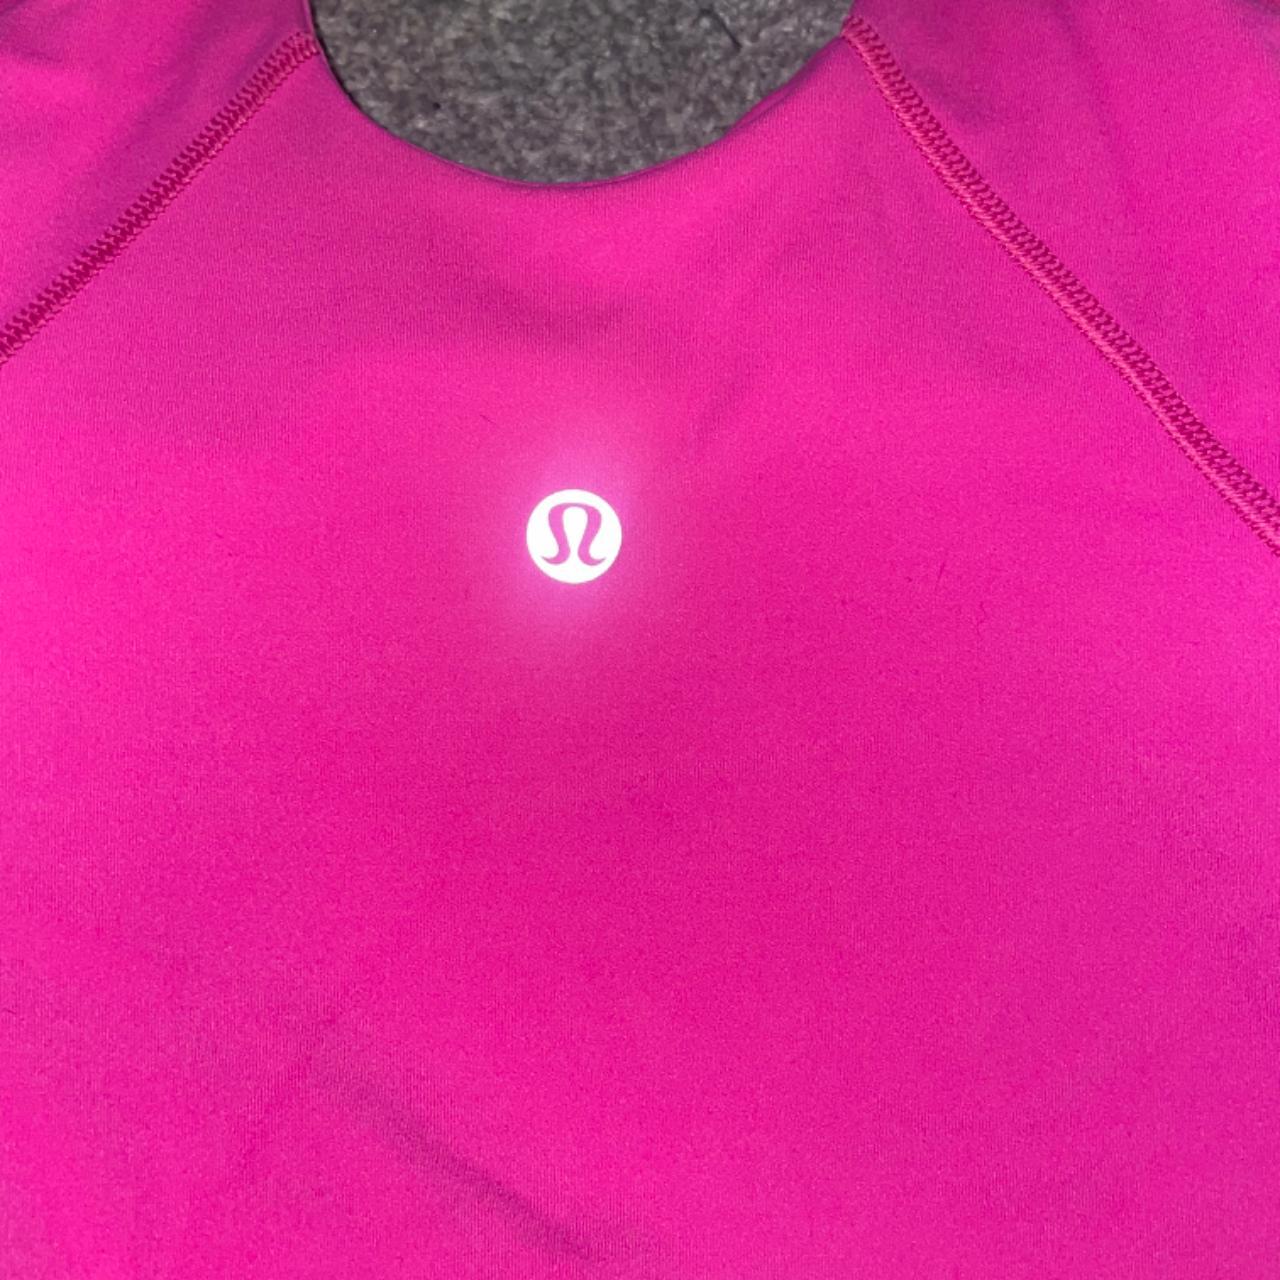 lululemon align tank top in sonic pink paypal only - Depop